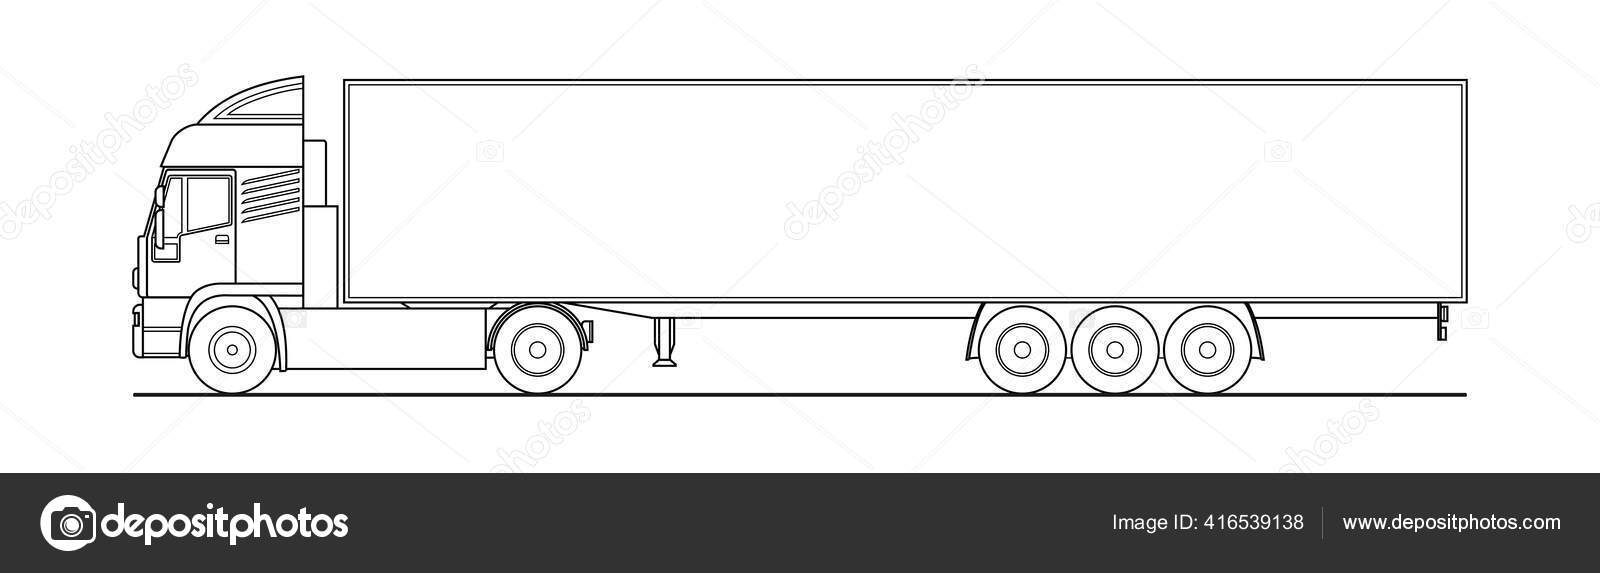 How To Draw A Tipper lorry Step by Step - [14 Easy Phase]